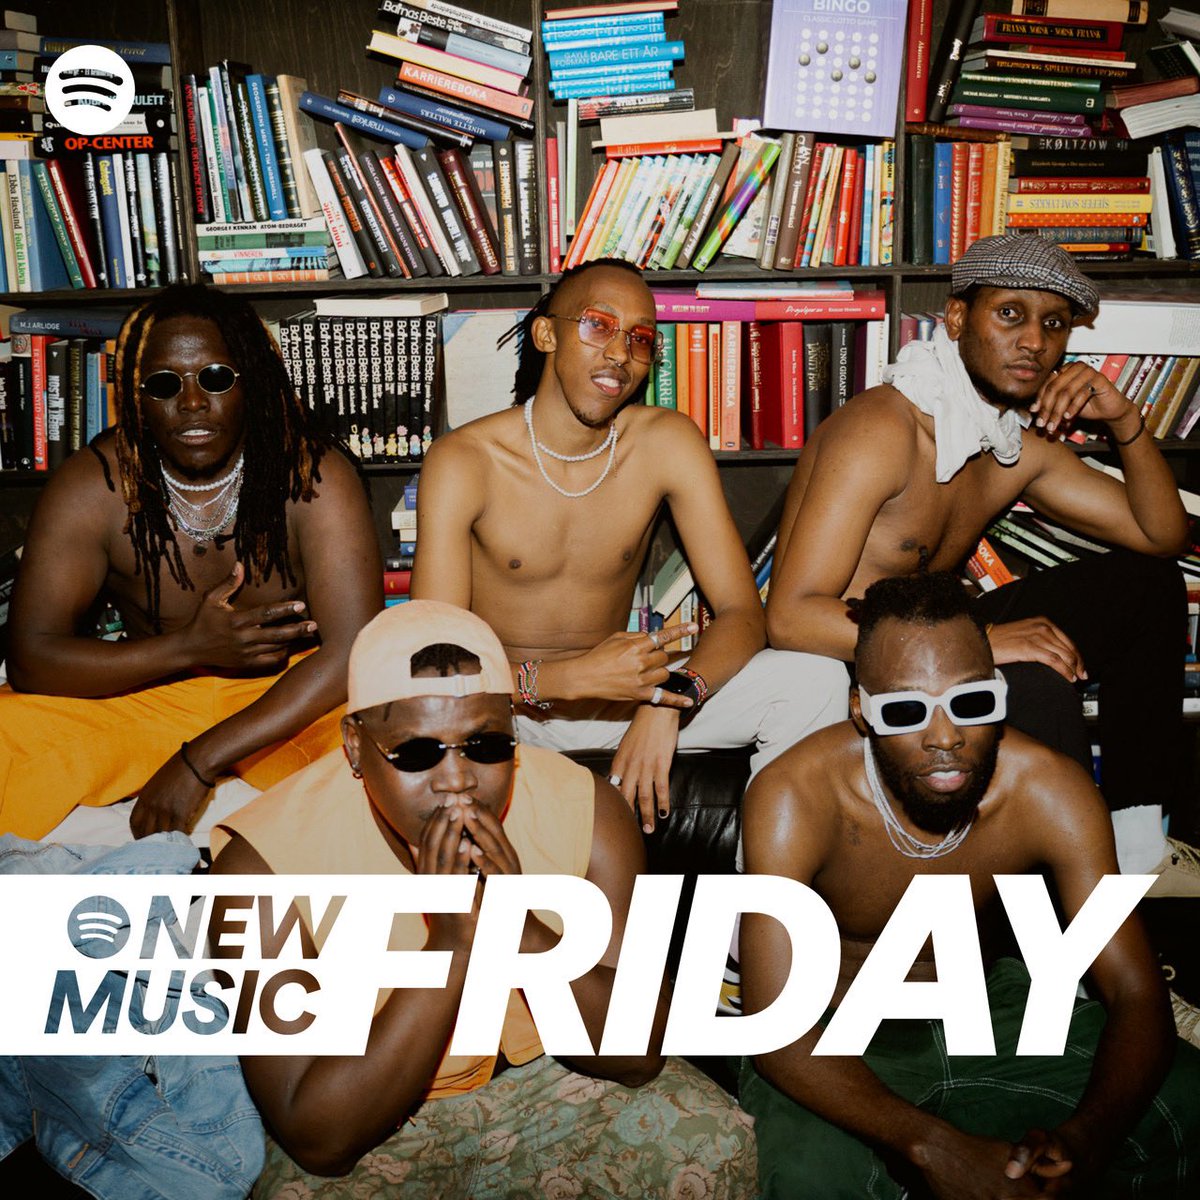 Guess who’s stealing the spotlight on this week’s covers of New Music Friday Kenya 🇰🇪 @SpotifyAfrica 💚 INAKUBALIKA ft @watendawili out now on Spotify! #NewMusicFriday #kenyanmusic